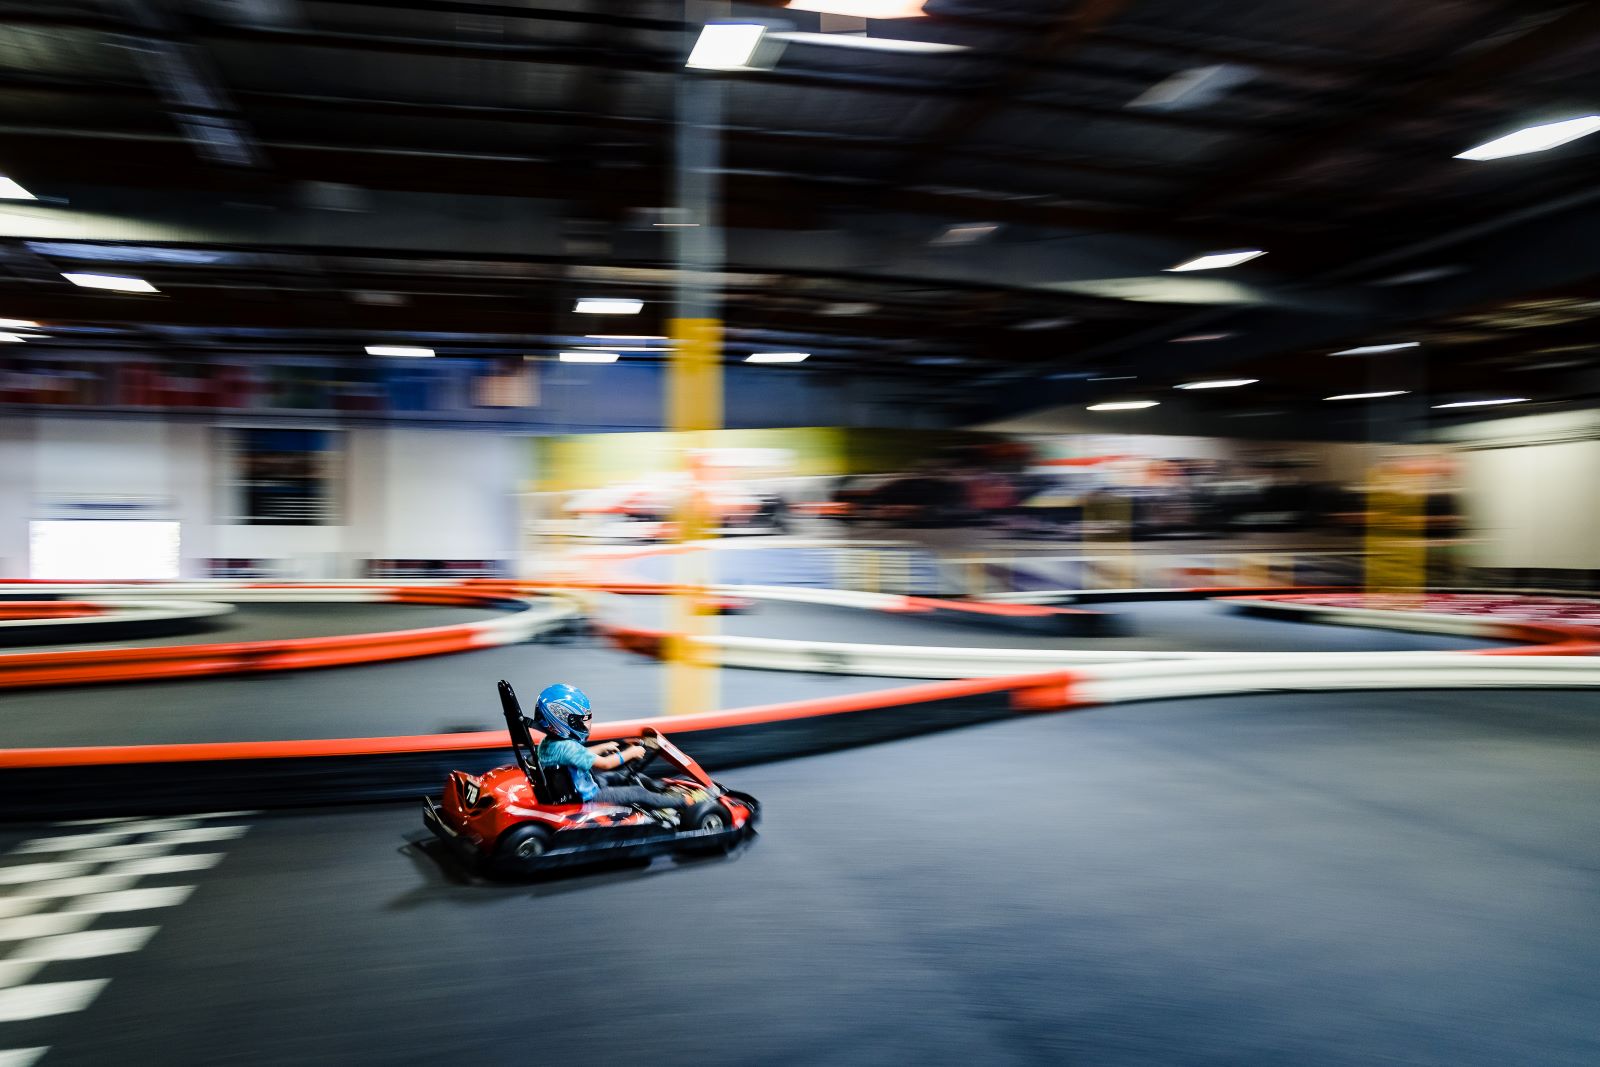 person racing on a go kart track